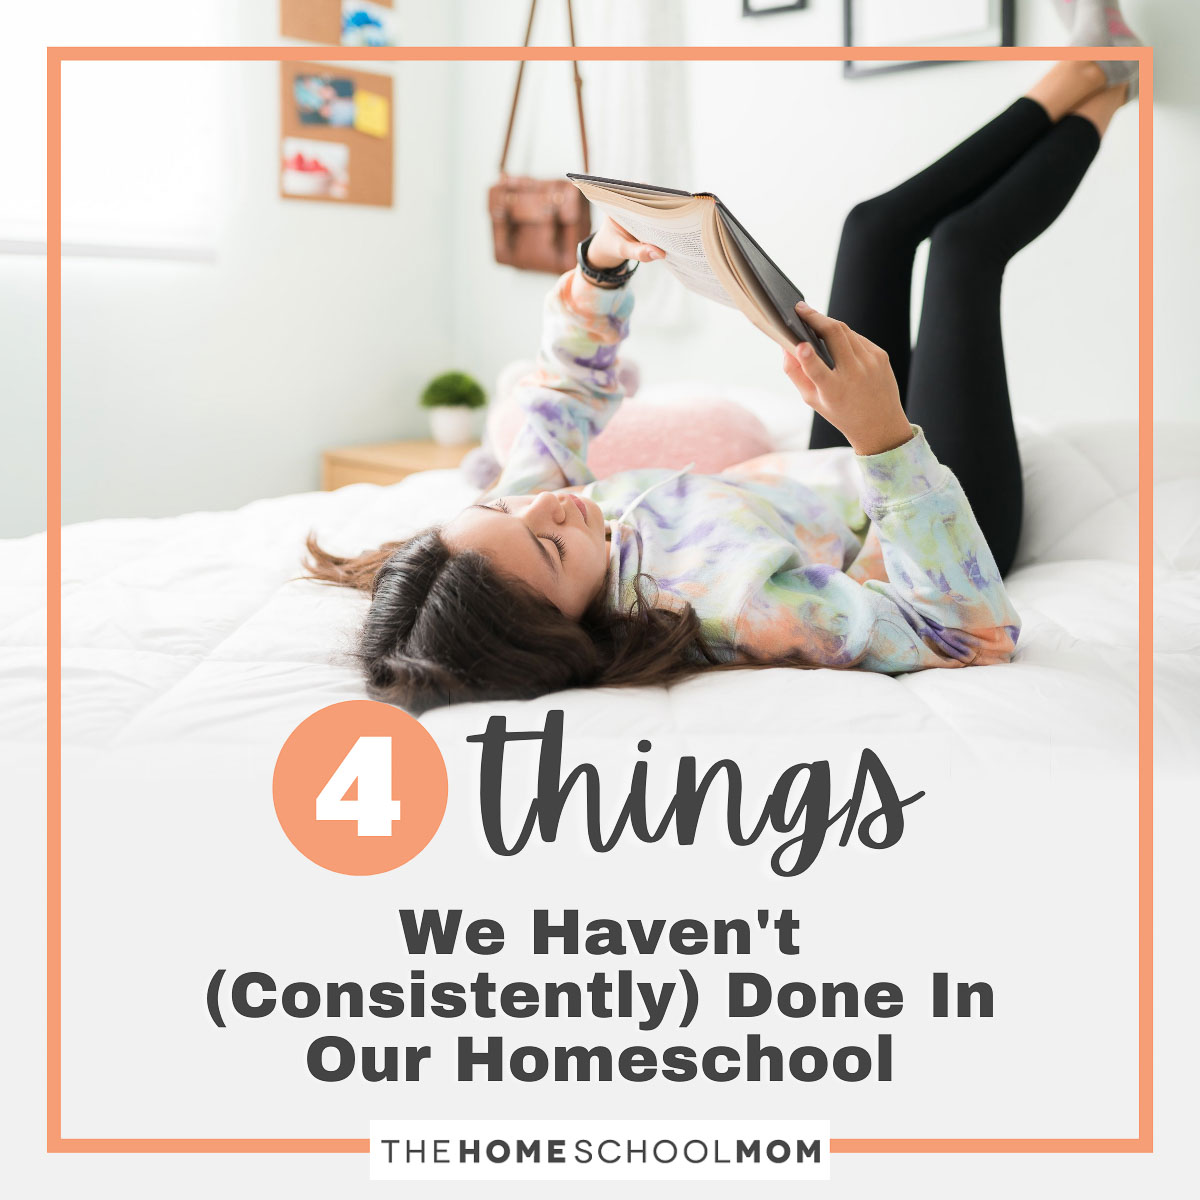 4 Things We Haven't (Consistently) Done In Our Homeschool